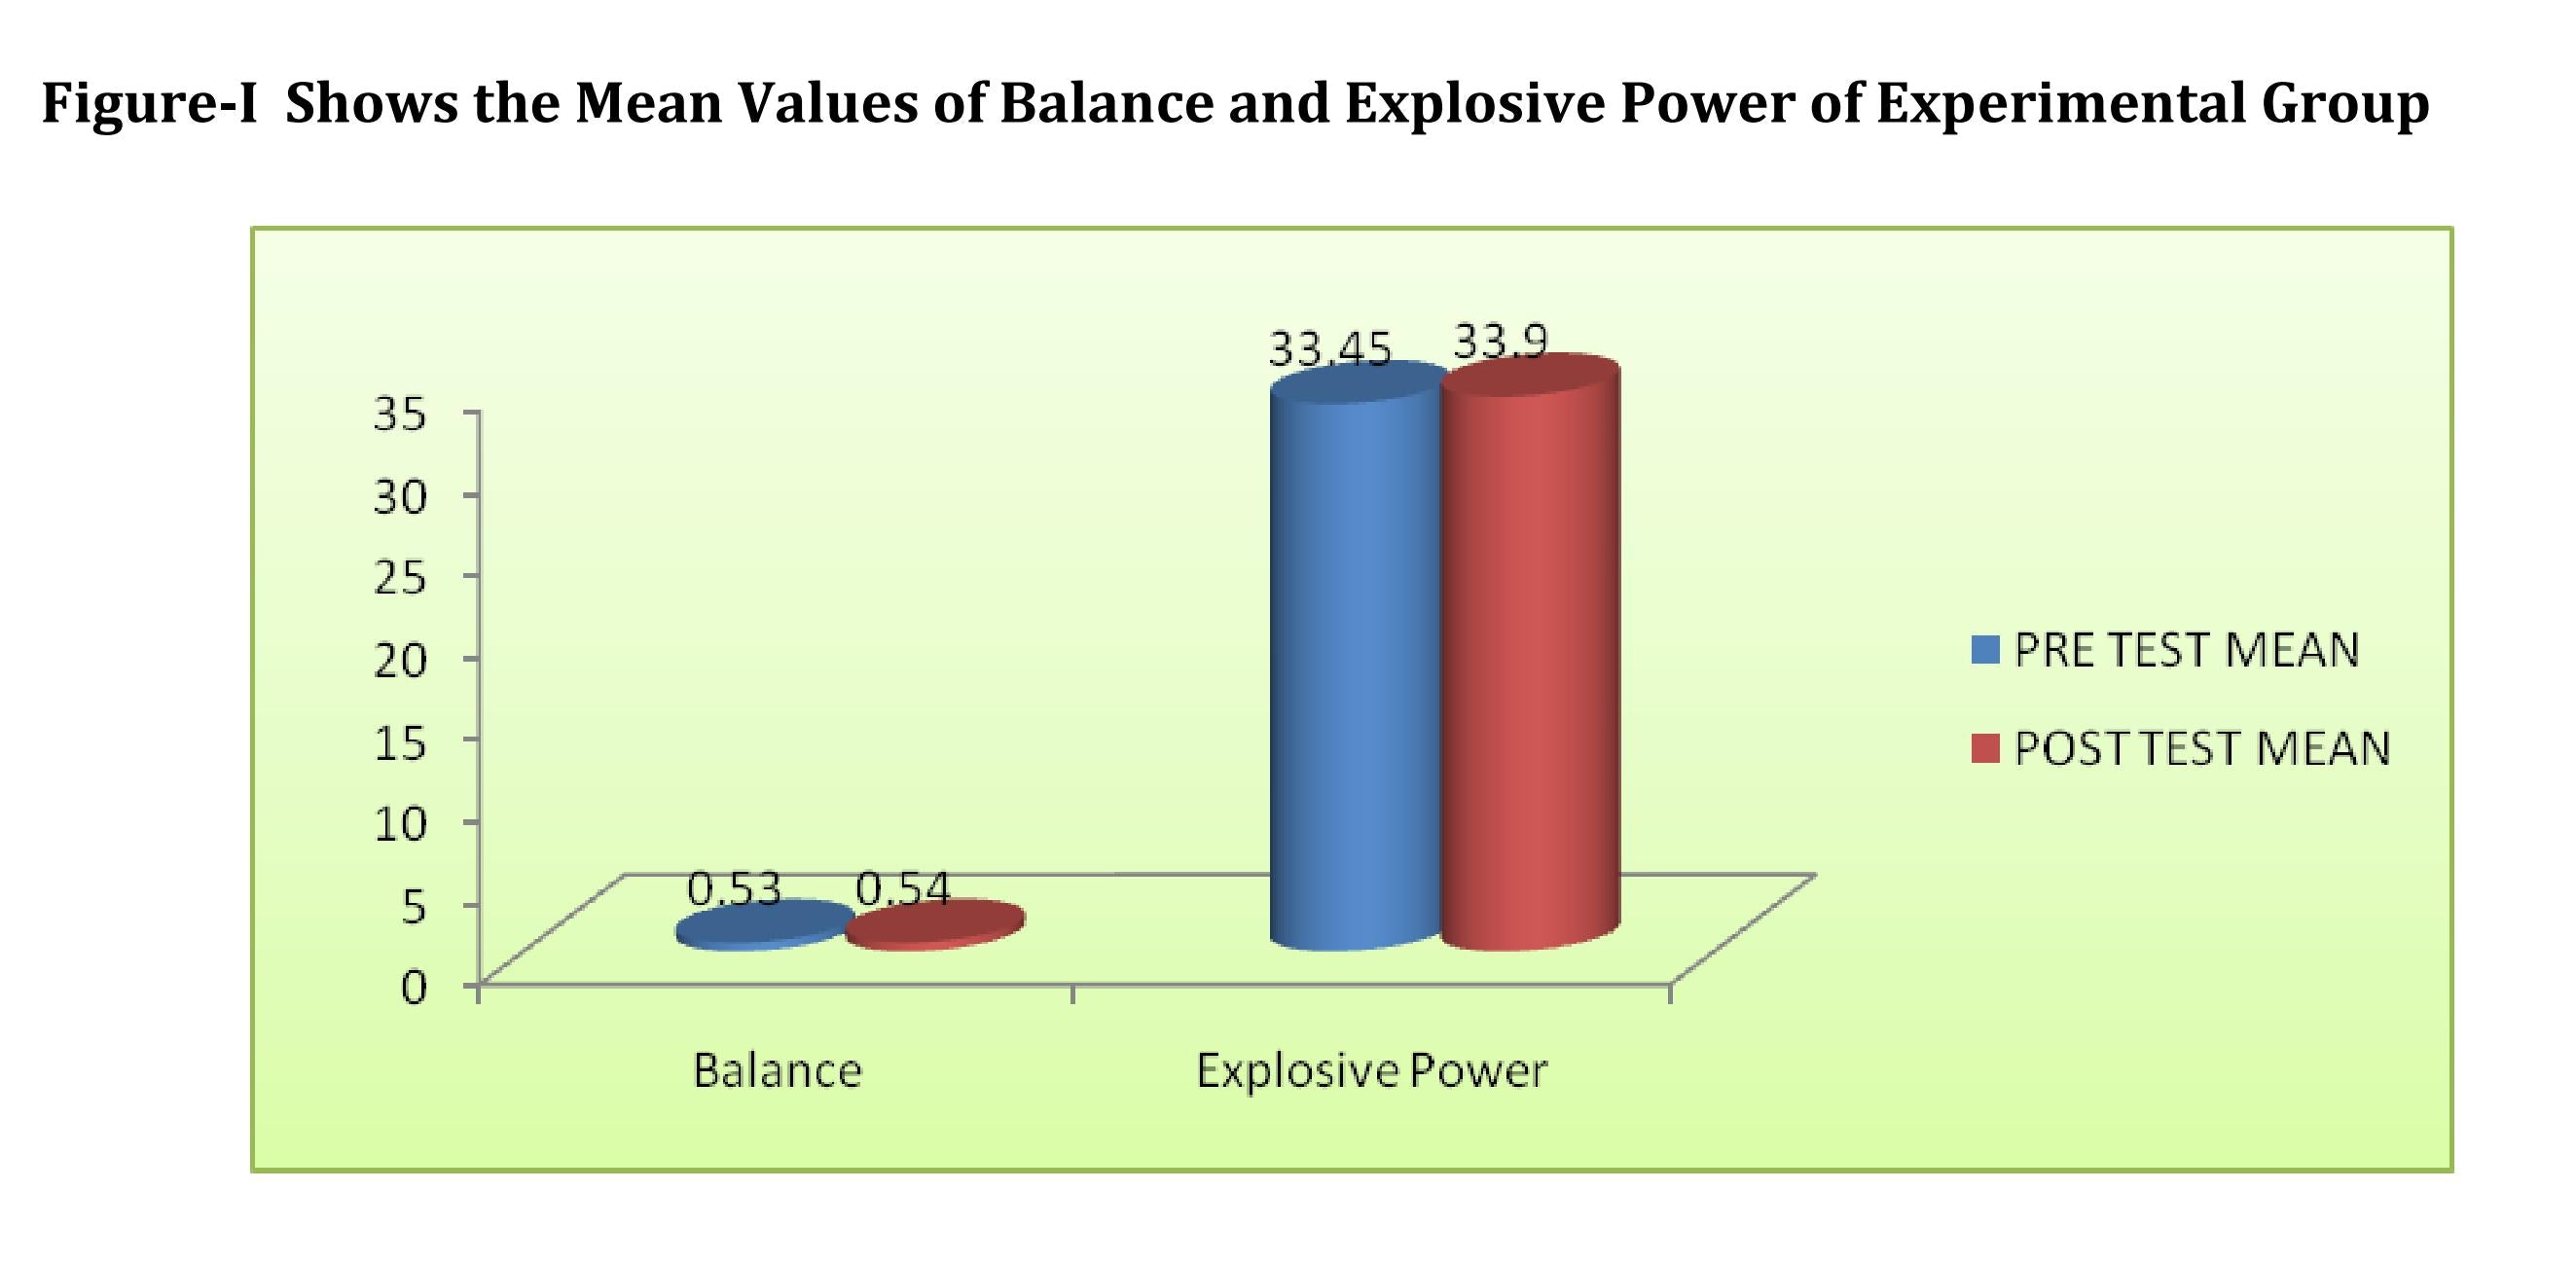 shows-the-mean-values-of-balance-and-explosive-power-of-experimental-group